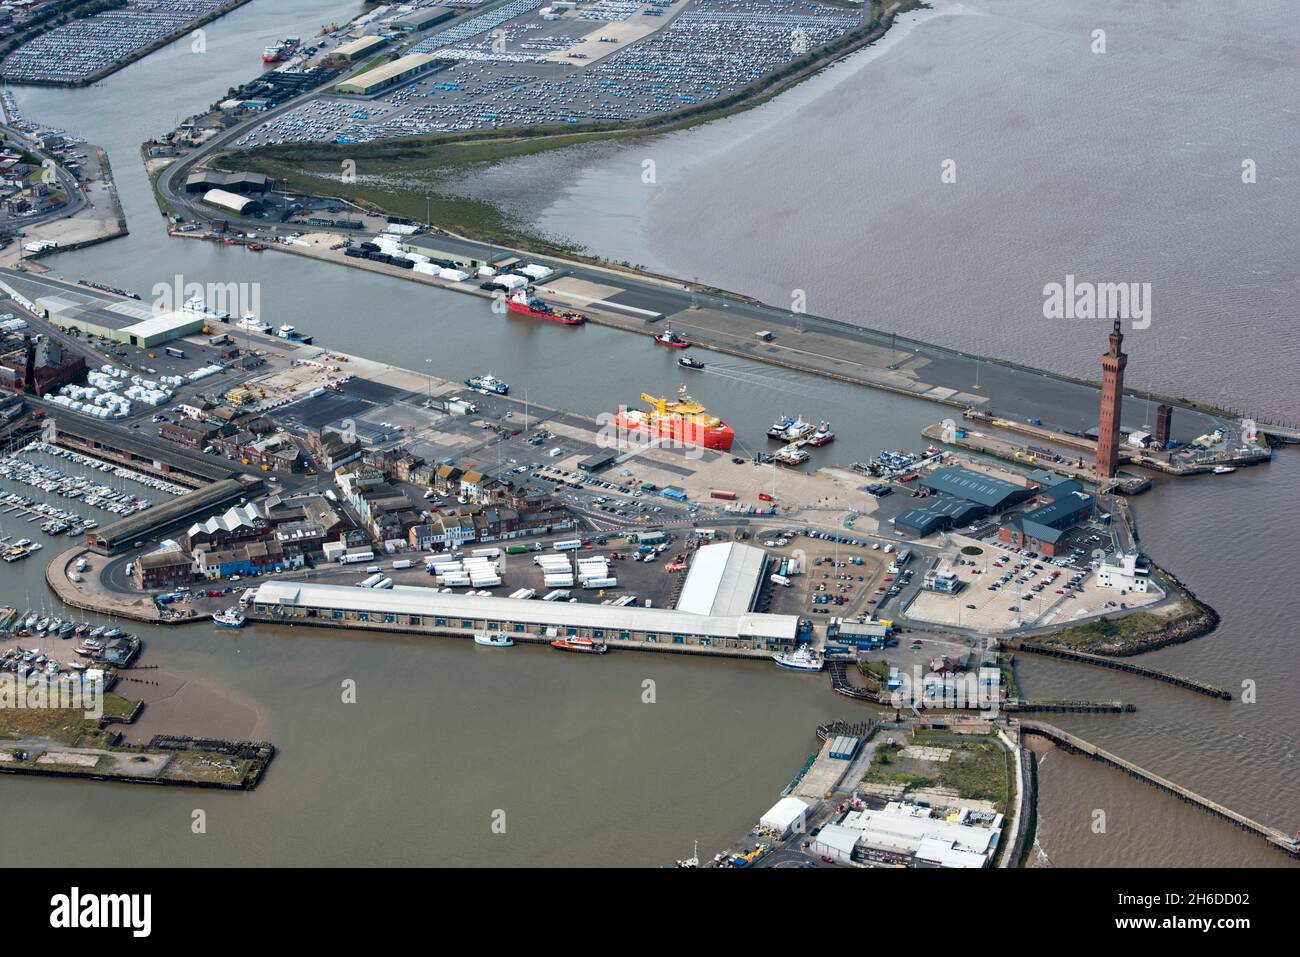 The Kasbah, The Dock Tower and Heritage Action Zone, Grimsby, Lincolnshire, 2019. Stock Photo